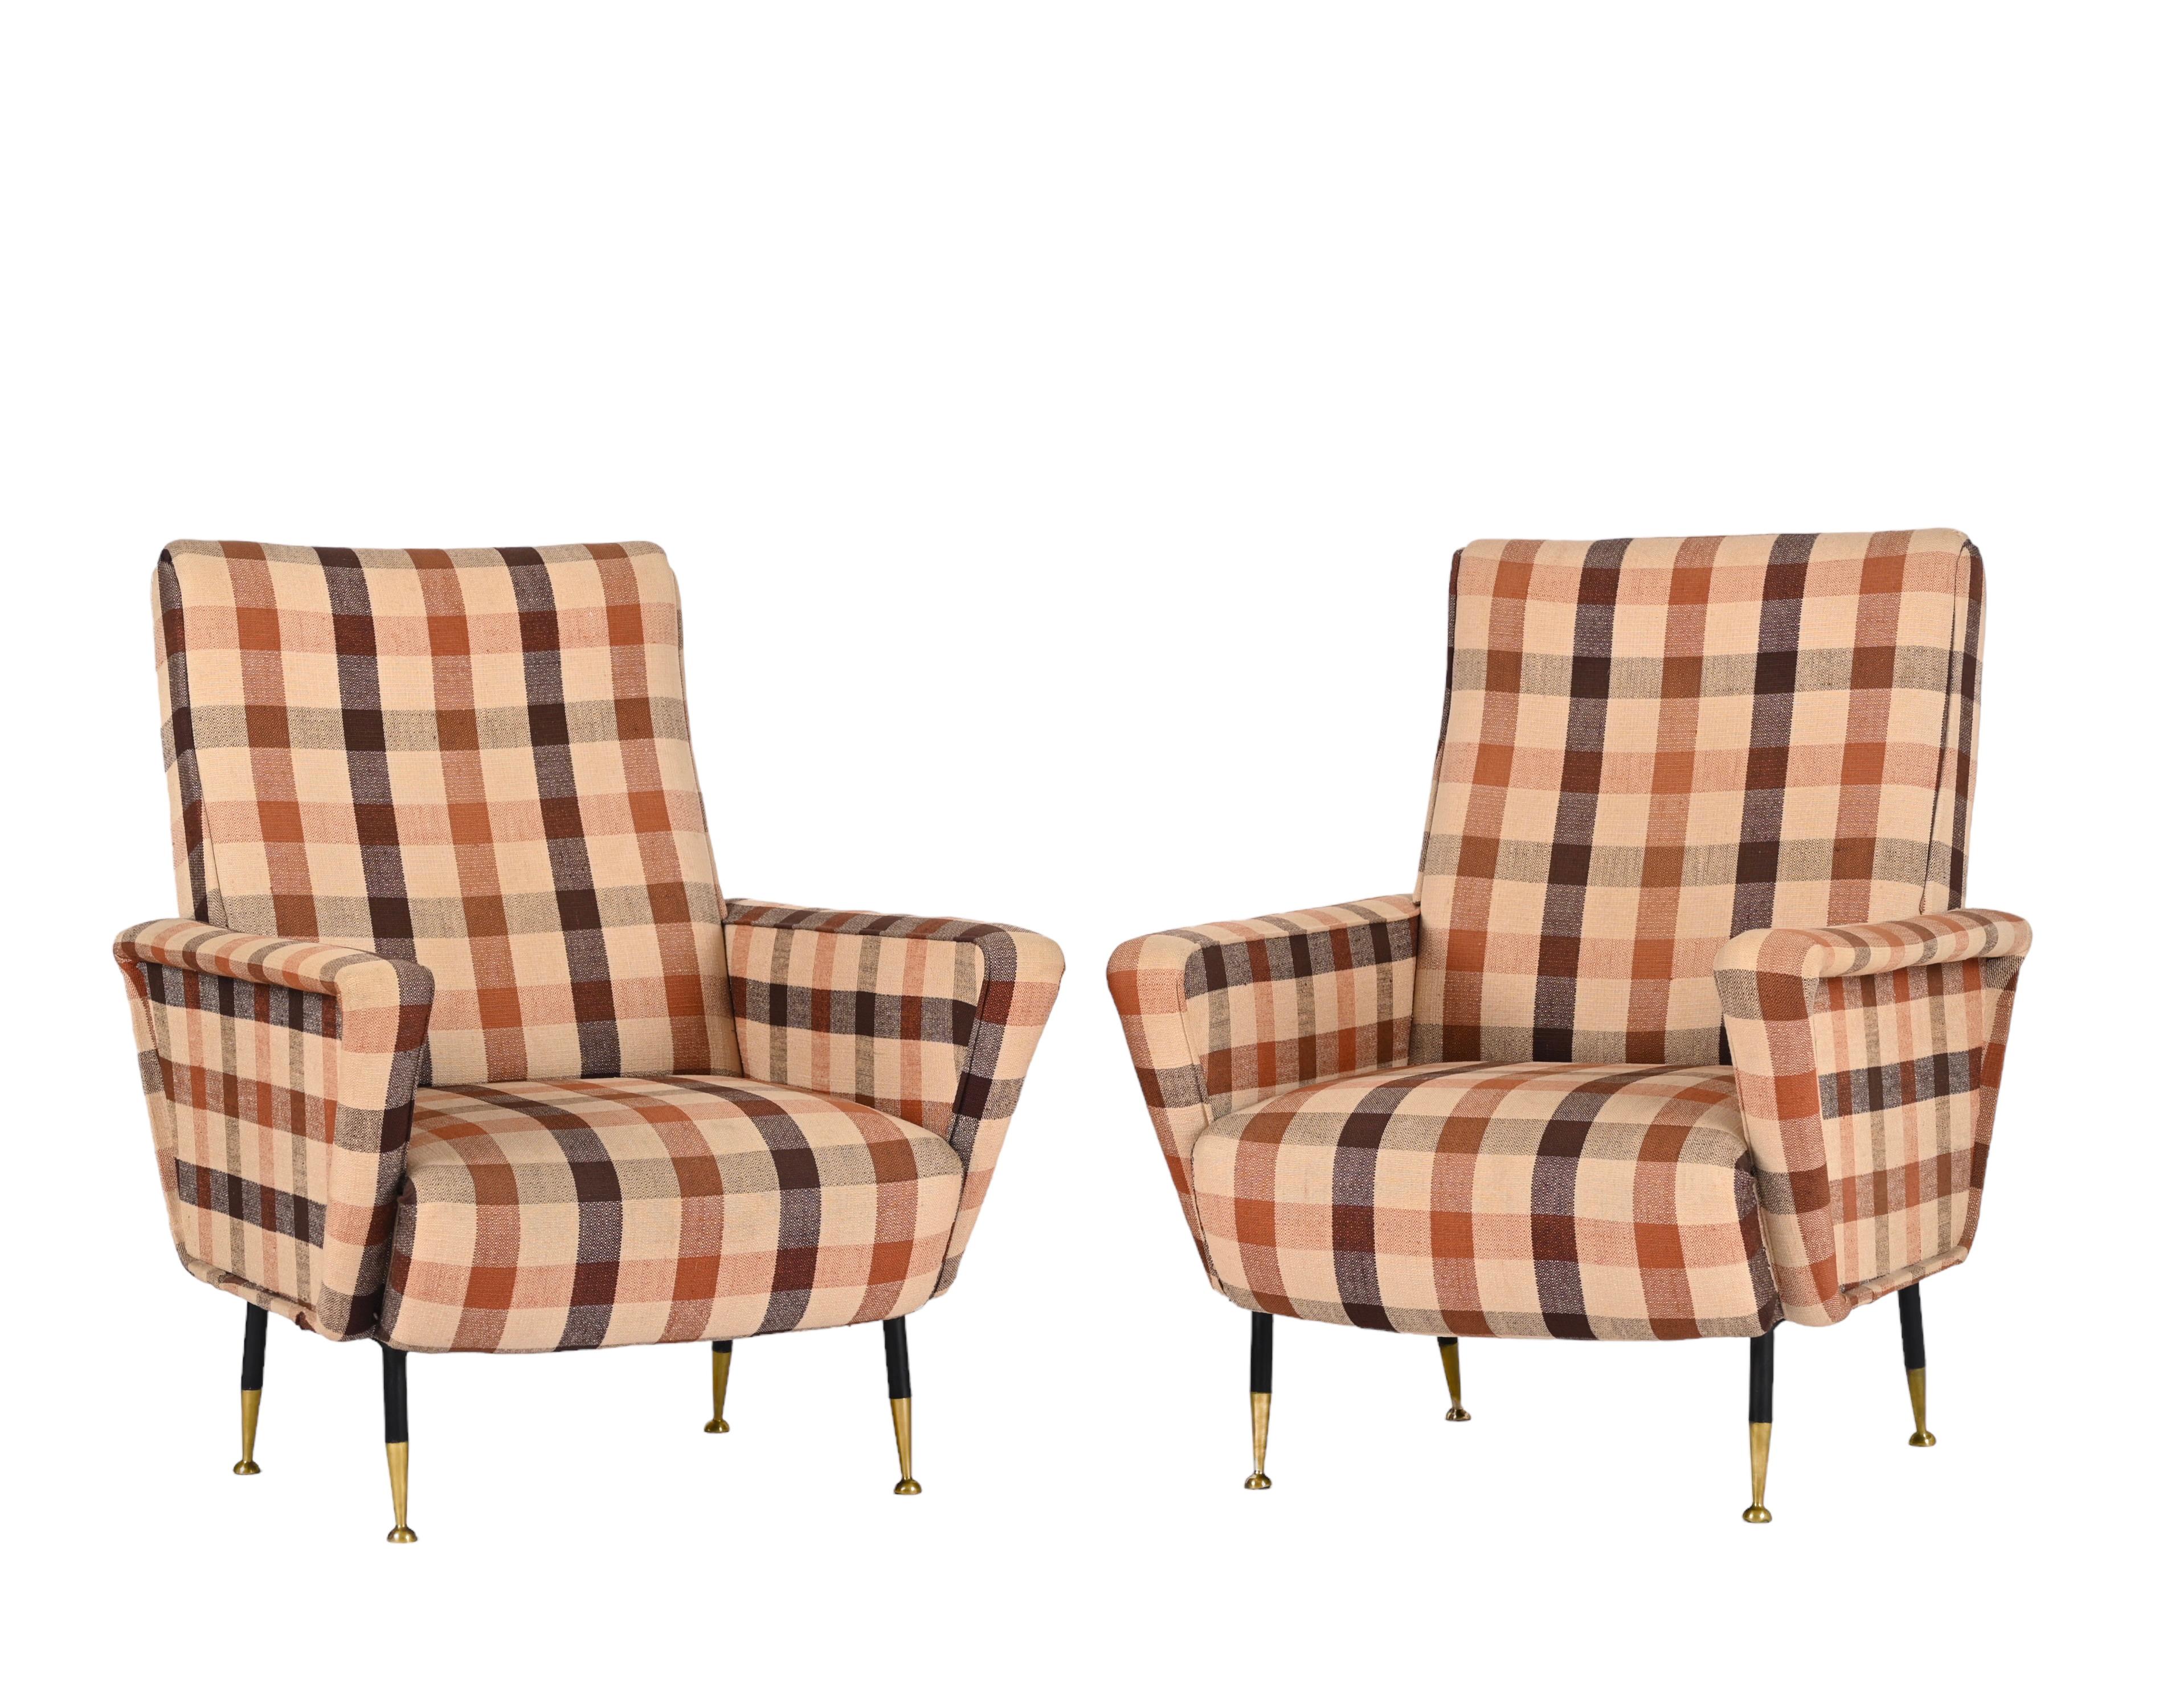 Marco Zanuso Pair of Armchairs, Check Fabric, Brass and Metal, Italy 1950s For Sale 6